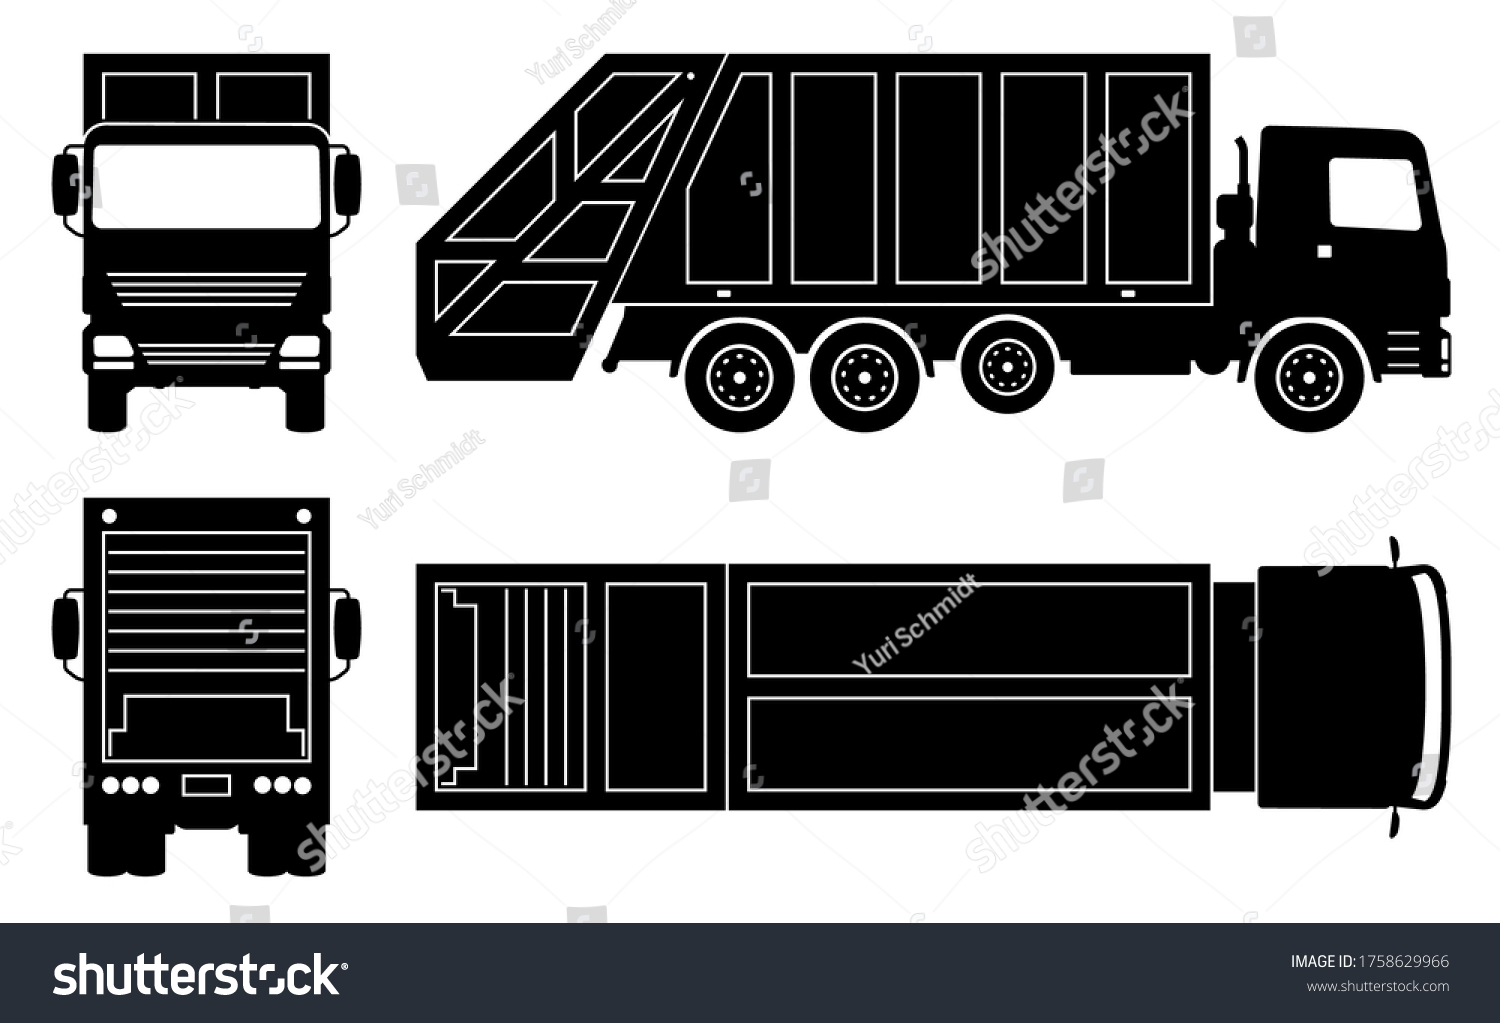 SVG of Garbage truck silhouette on white background. Vehicle icons set view from side, front, back, and top svg